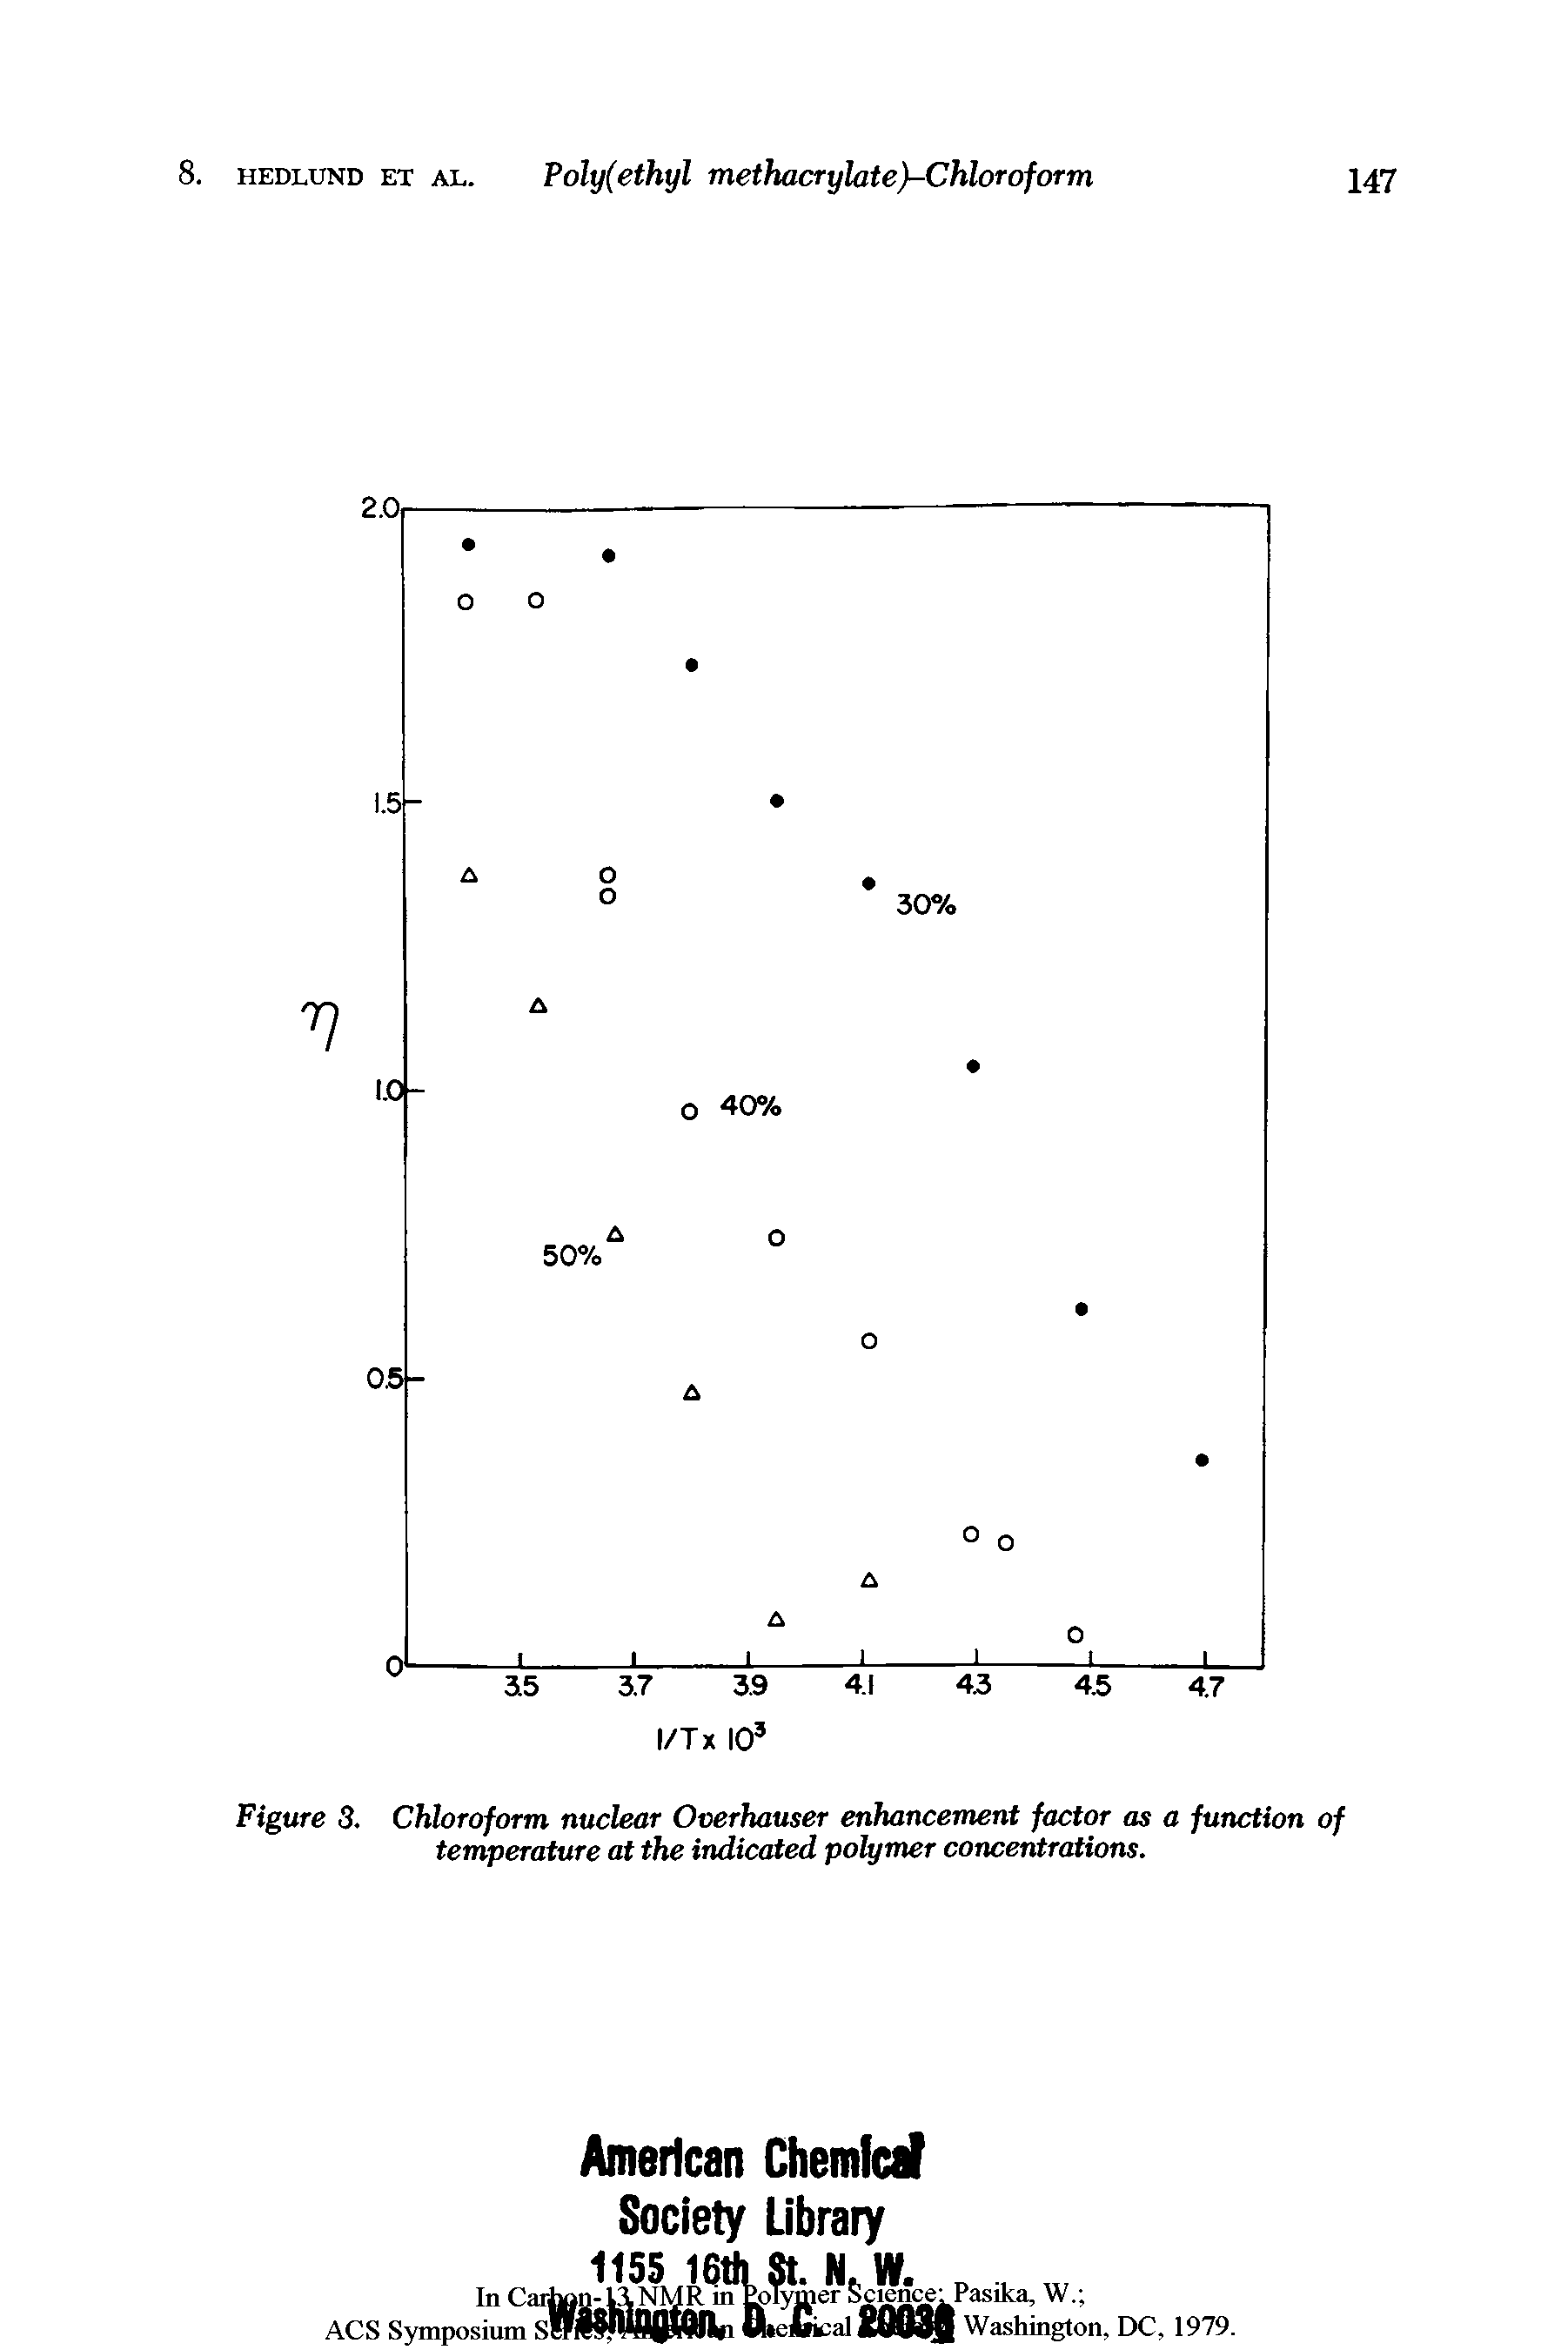 Figure 3. Chloroform nuclear Overhauser enhancement factor as a function of temperature at the indicated polymer concentrations.